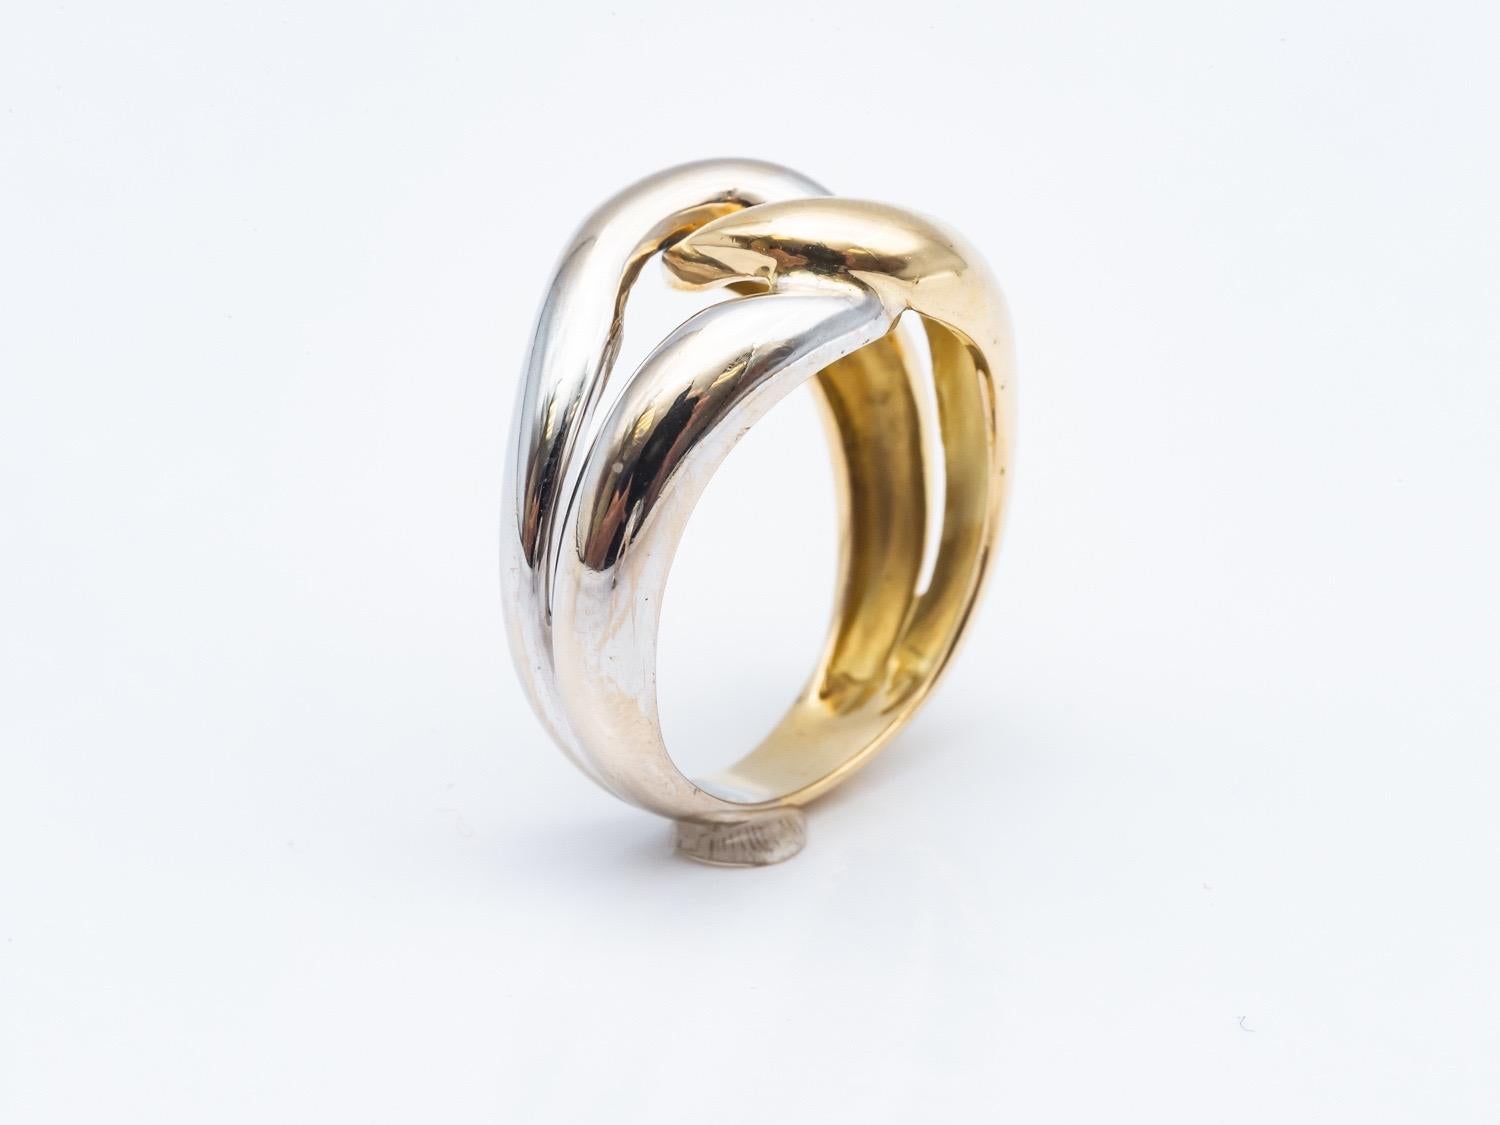  18K White Gold Tresse Ring 18K Yellow Gold
This Tresse ring is composed of a white gold ring 18 Carats and a yellow gold ring 18 Carats which are both intertwined like a braid.
French Size 54
British Size N
US Size 6.78